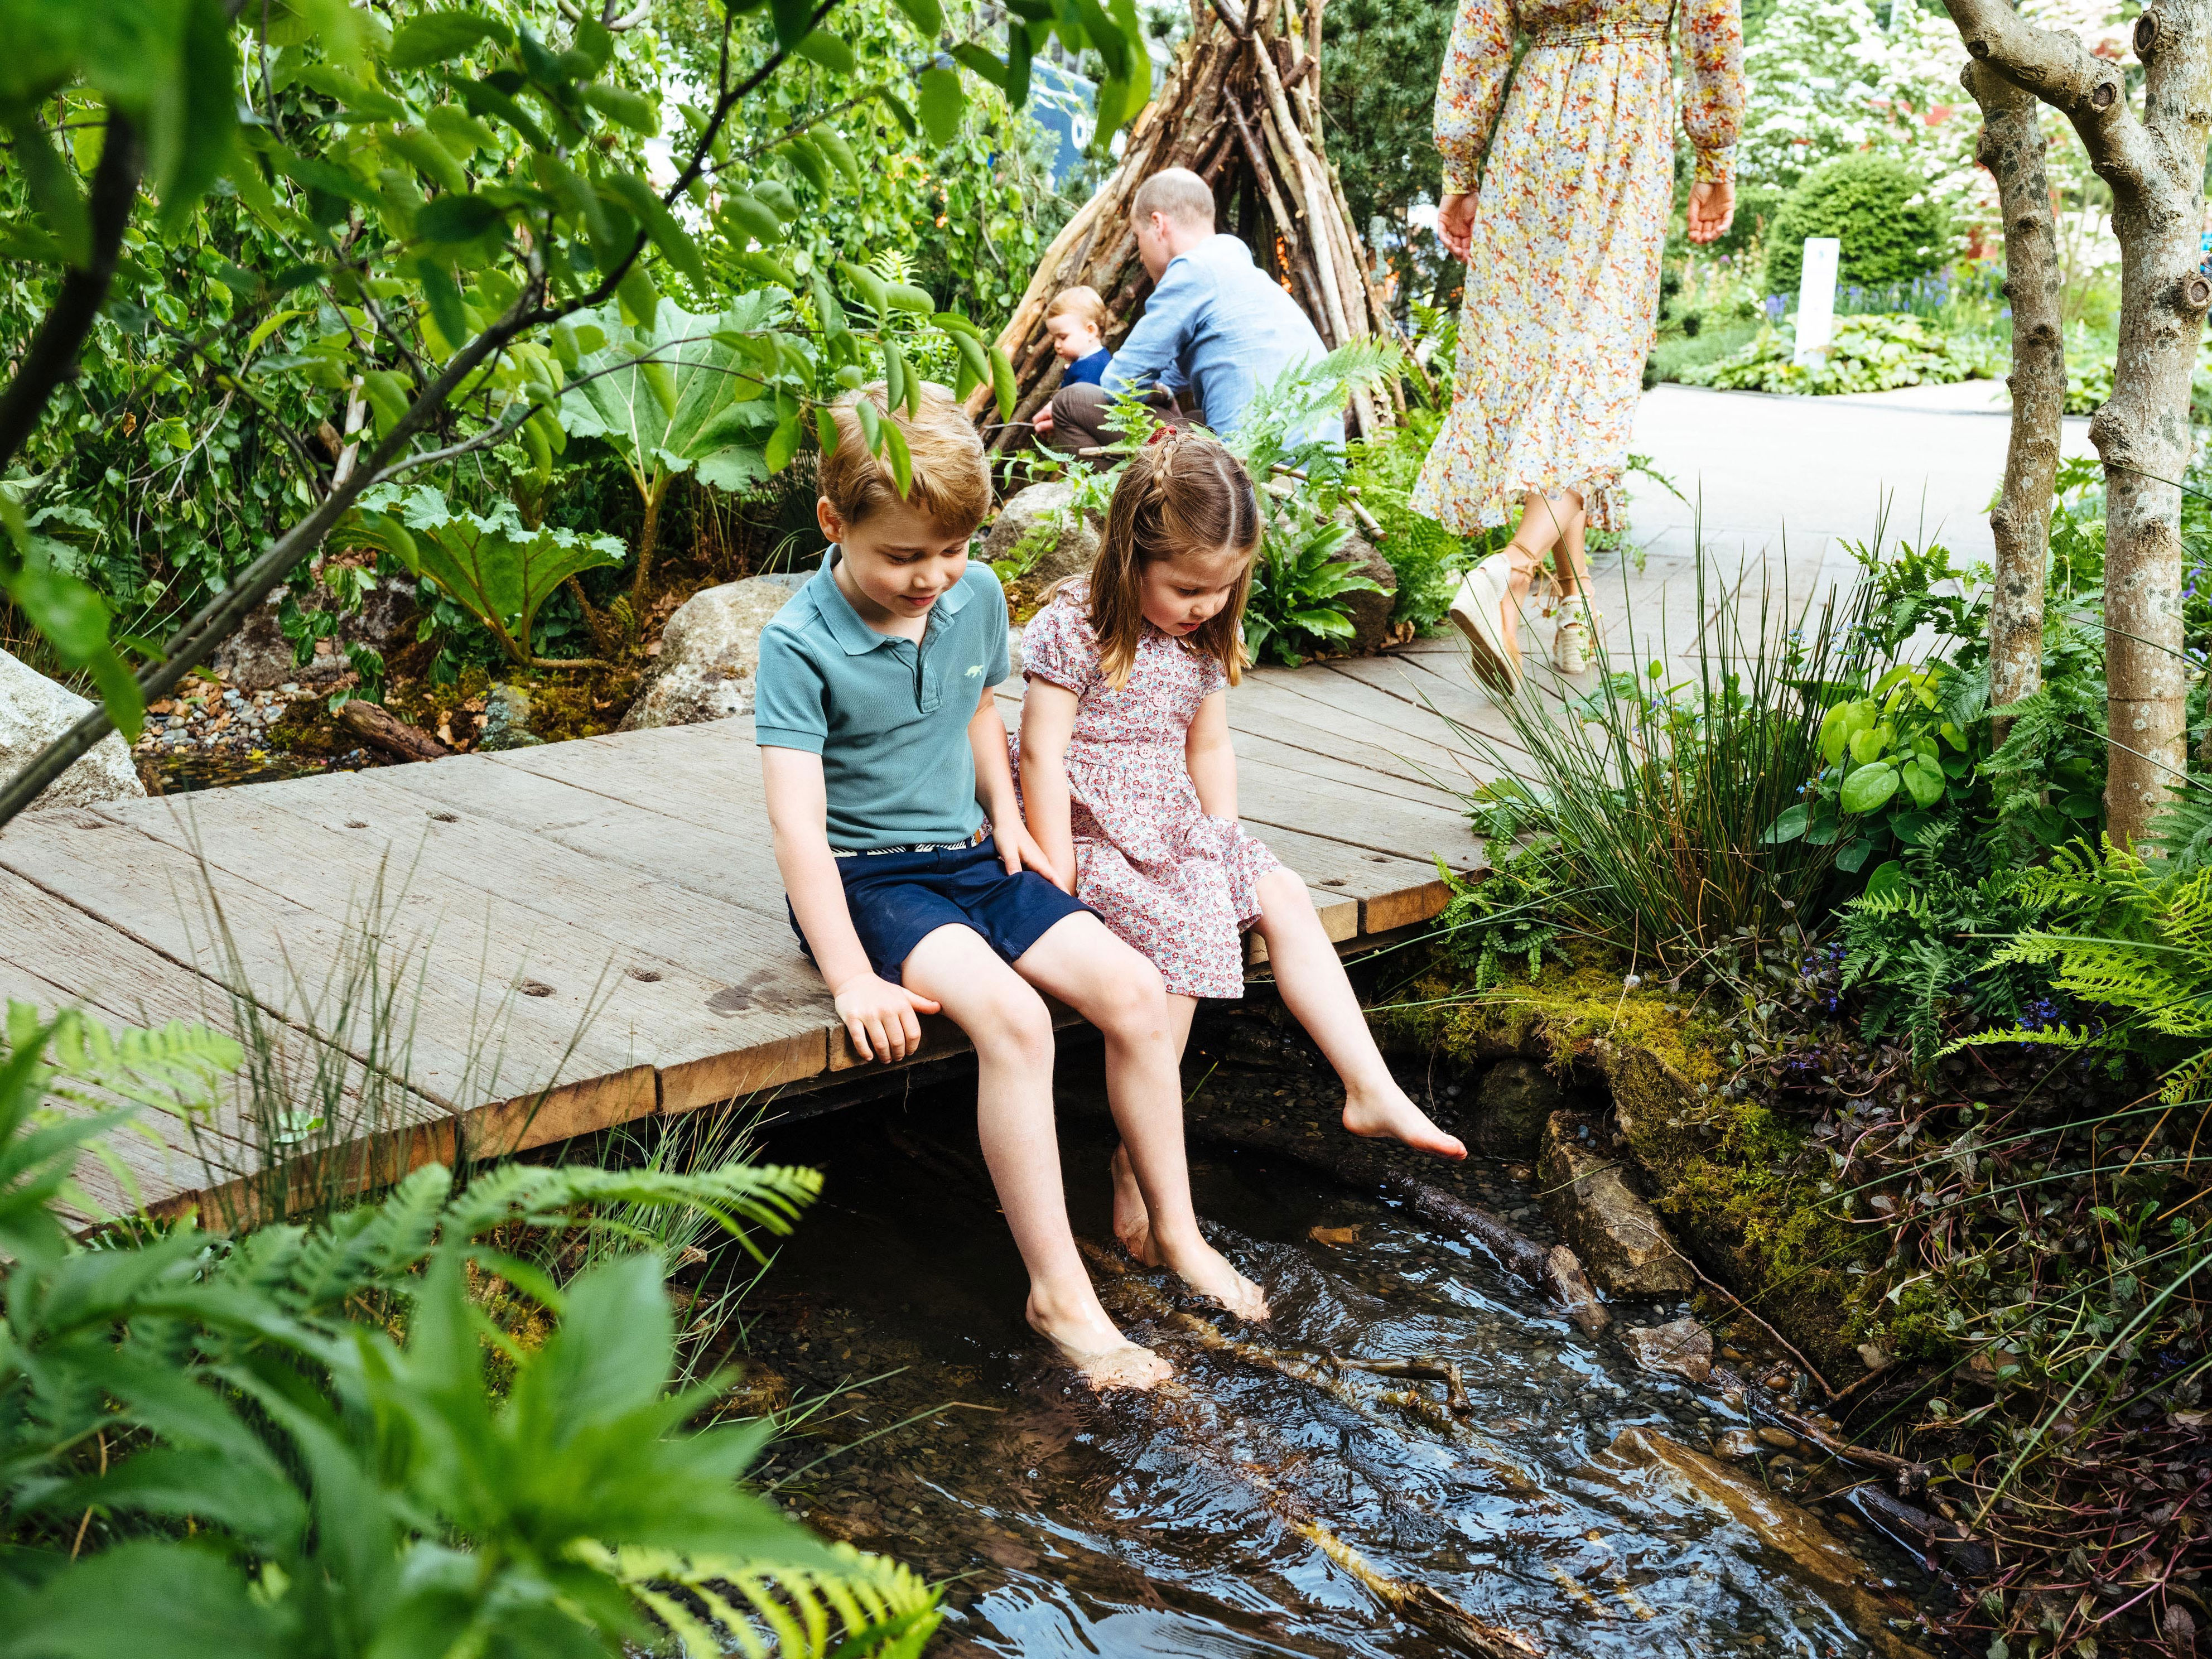 <p>Prince George and Princess Charlotte swung their legs over a brook as they explored the garden mom <a href="https://www.wonderwall.com/celebrity/profiles/overview/duchess-kate-1356.article">Duchess Kate</a> co-designed with Adam White and Andree Davies for the RHS Chelsea Flower Show in London on May 19, 2019.</p>